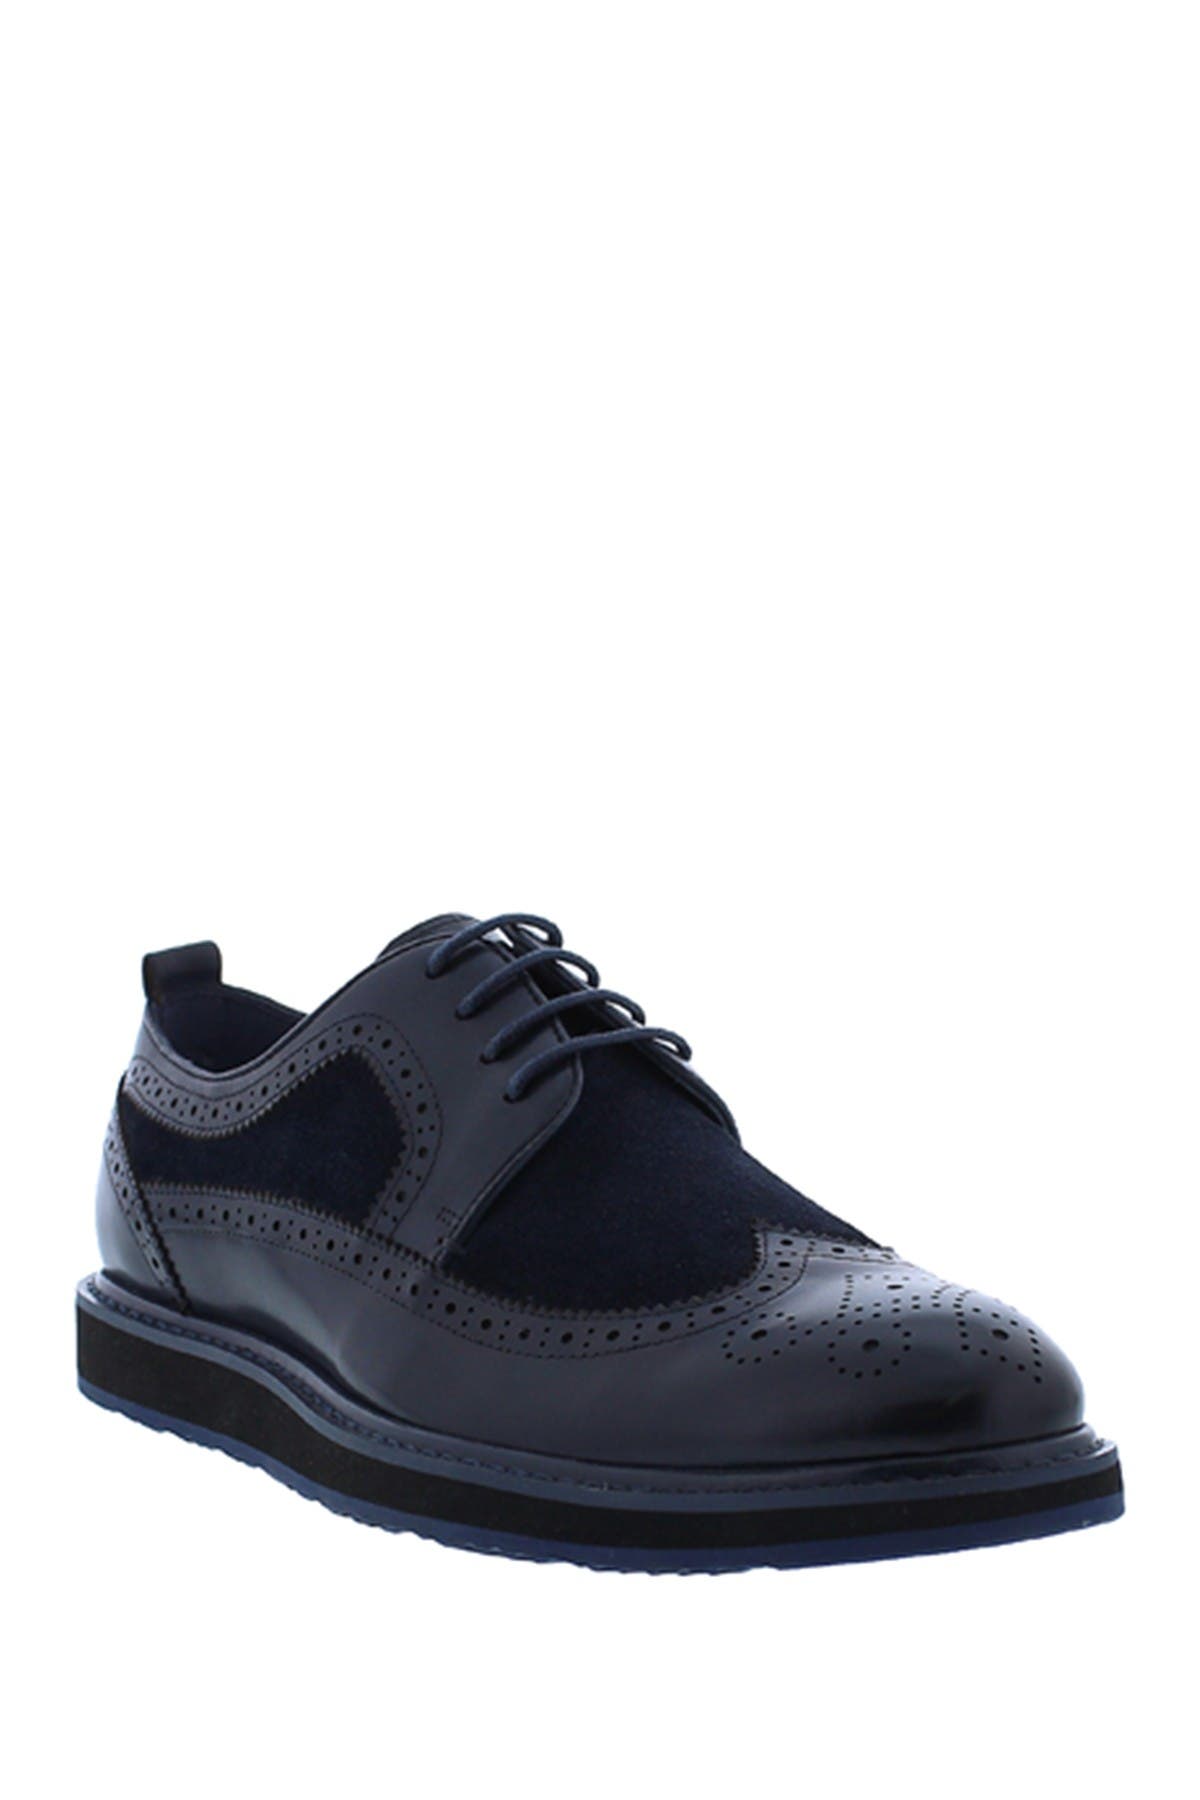 English Laundry Costner Dress Shoe In Navy